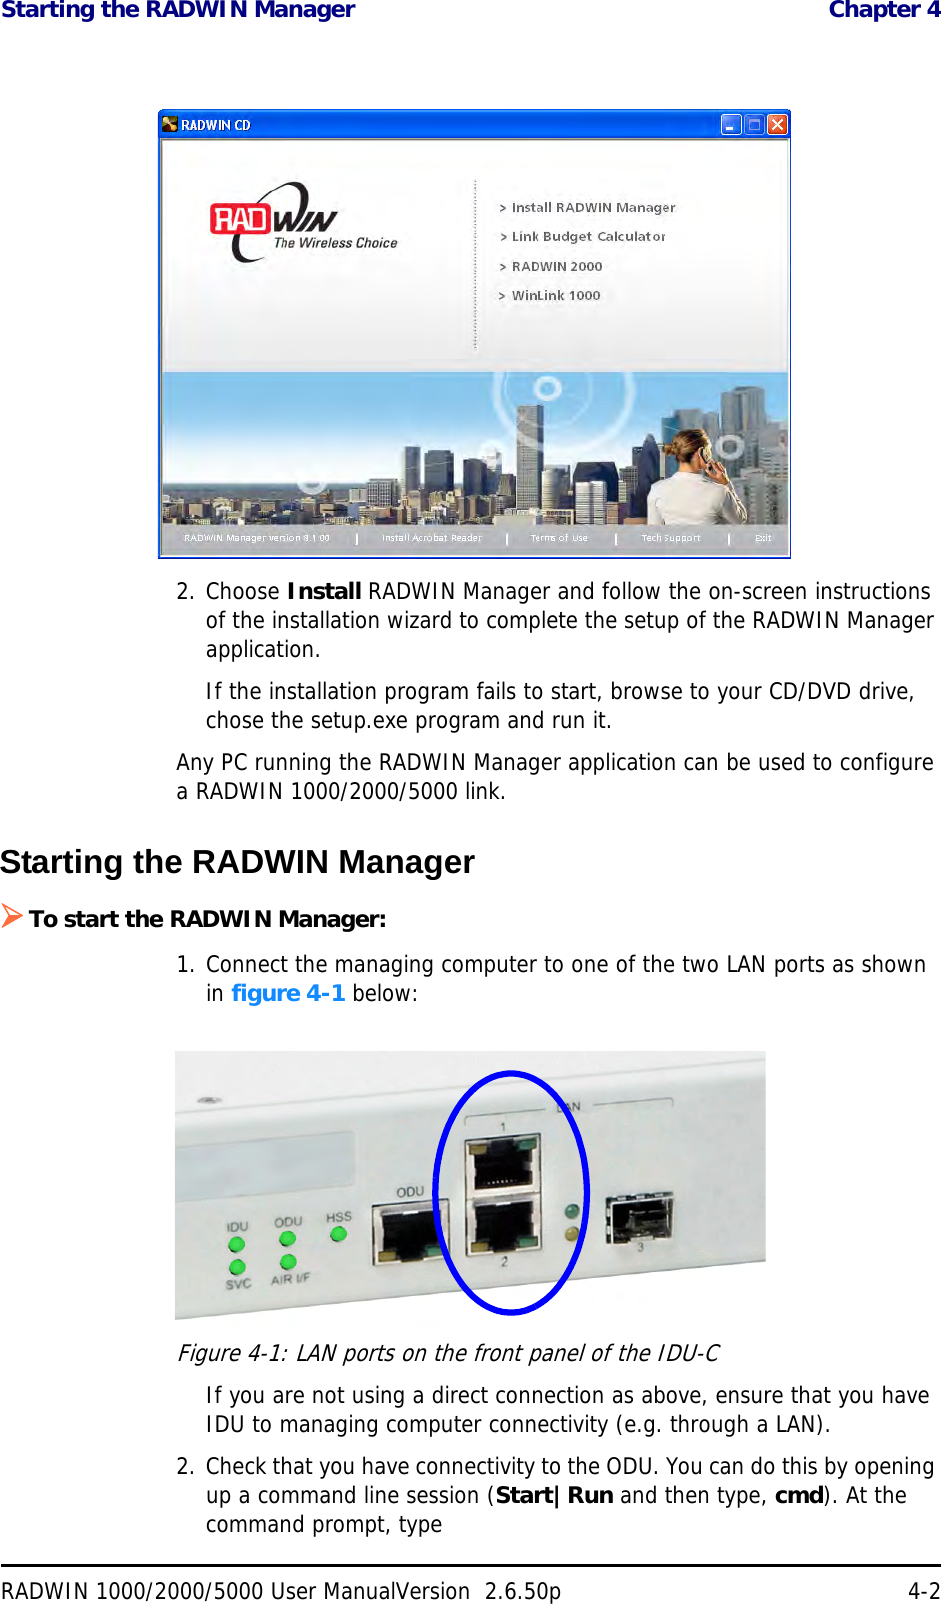 Starting the RADWIN Manager  Chapter 4RADWIN 1000/2000/5000 User ManualVersion  2.6.50p 4-22. Choose Install RADWIN Manager and follow the on-screen instructions of the installation wizard to complete the setup of the RADWIN Manager application.If the installation program fails to start, browse to your CD/DVD drive, chose the setup.exe program and run it.Any PC running the RADWIN Manager application can be used to configure a RADWIN 1000/2000/5000 link.Starting the RADWIN Manager To start the RADWIN Manager:1. Connect the managing computer to one of the two LAN ports as shown in figure 4-1 below:Figure 4-1: LAN ports on the front panel of the IDU-CIf you are not using a direct connection as above, ensure that you have IDU to managing computer connectivity (e.g. through a LAN).2. Check that you have connectivity to the ODU. You can do this by opening up a command line session (Start|Run and then type, cmd). At the command prompt, type